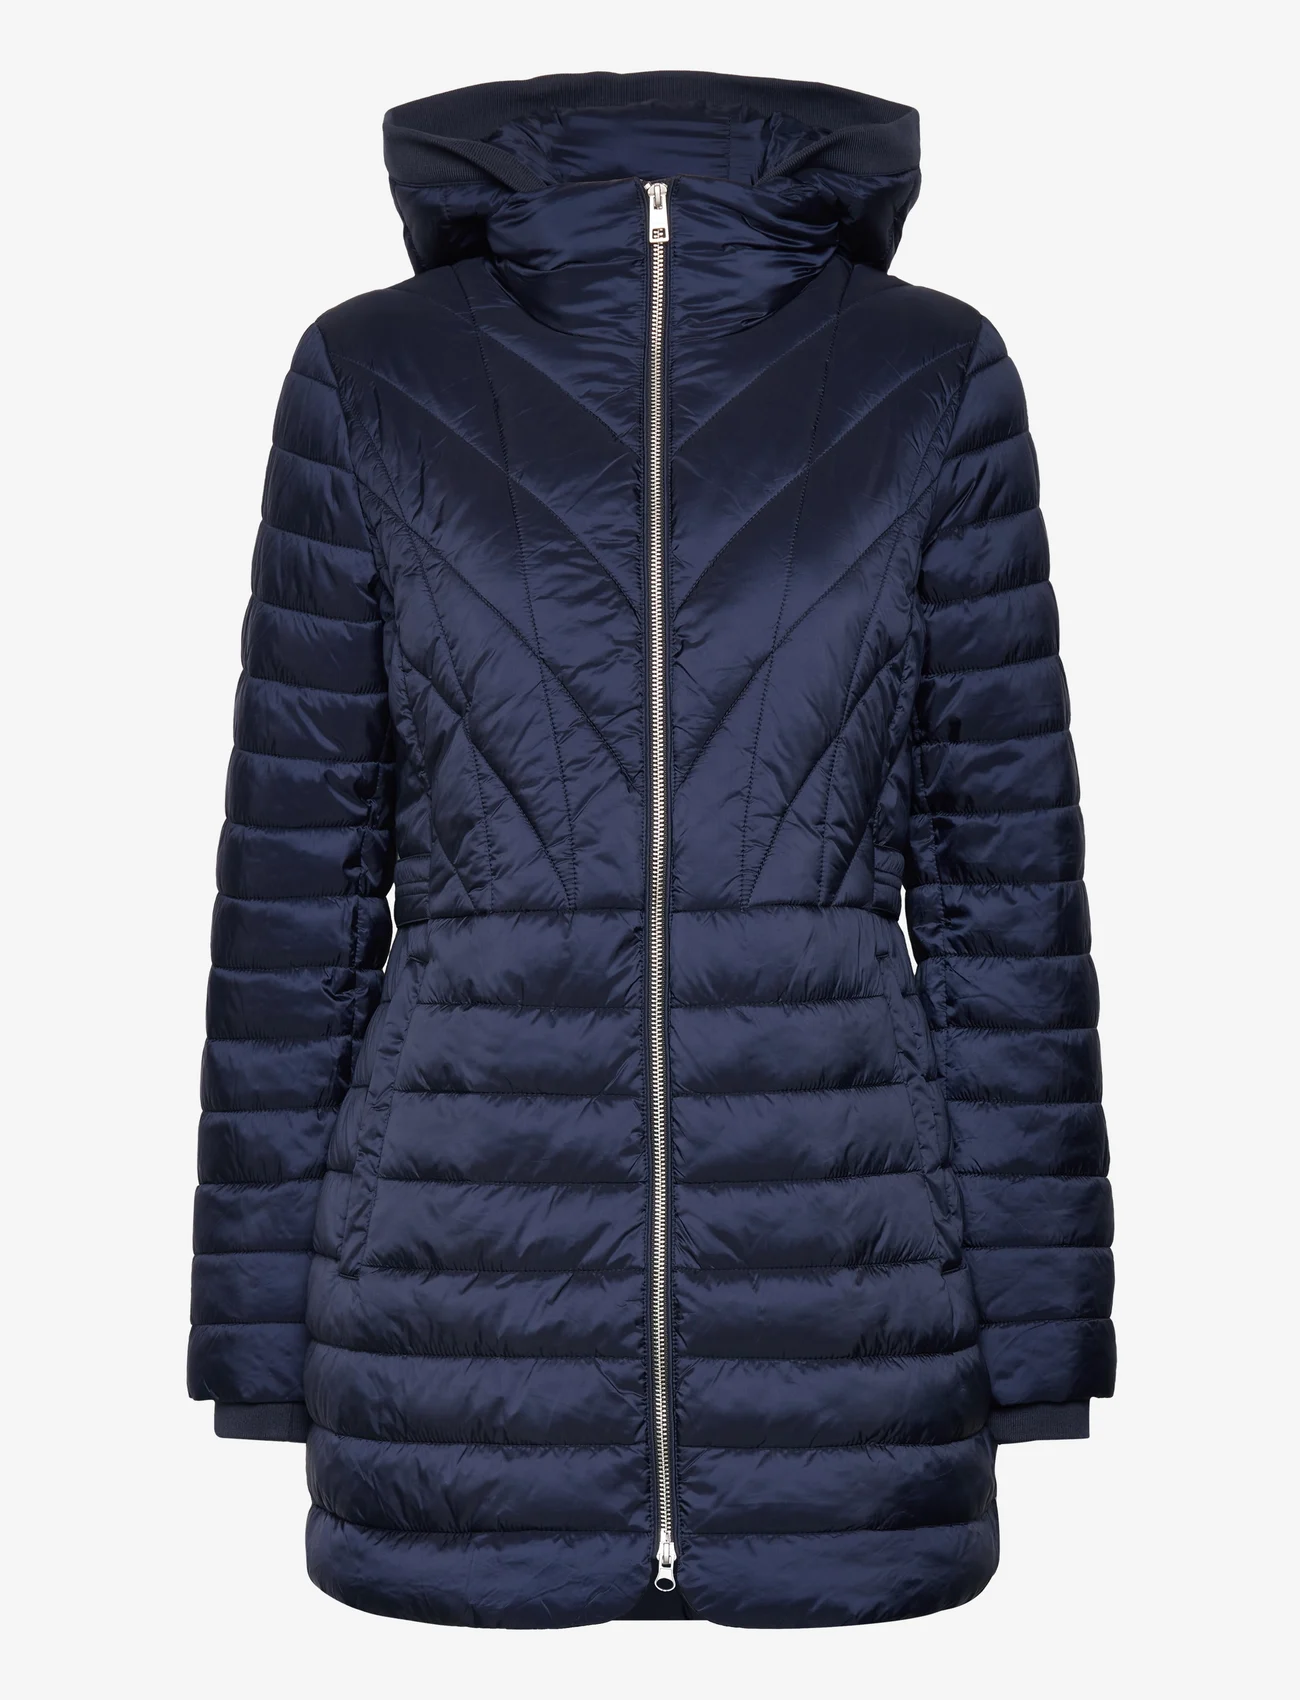 Esprit Collection - Jackets outdoor woven - winter jackets - navy - 0